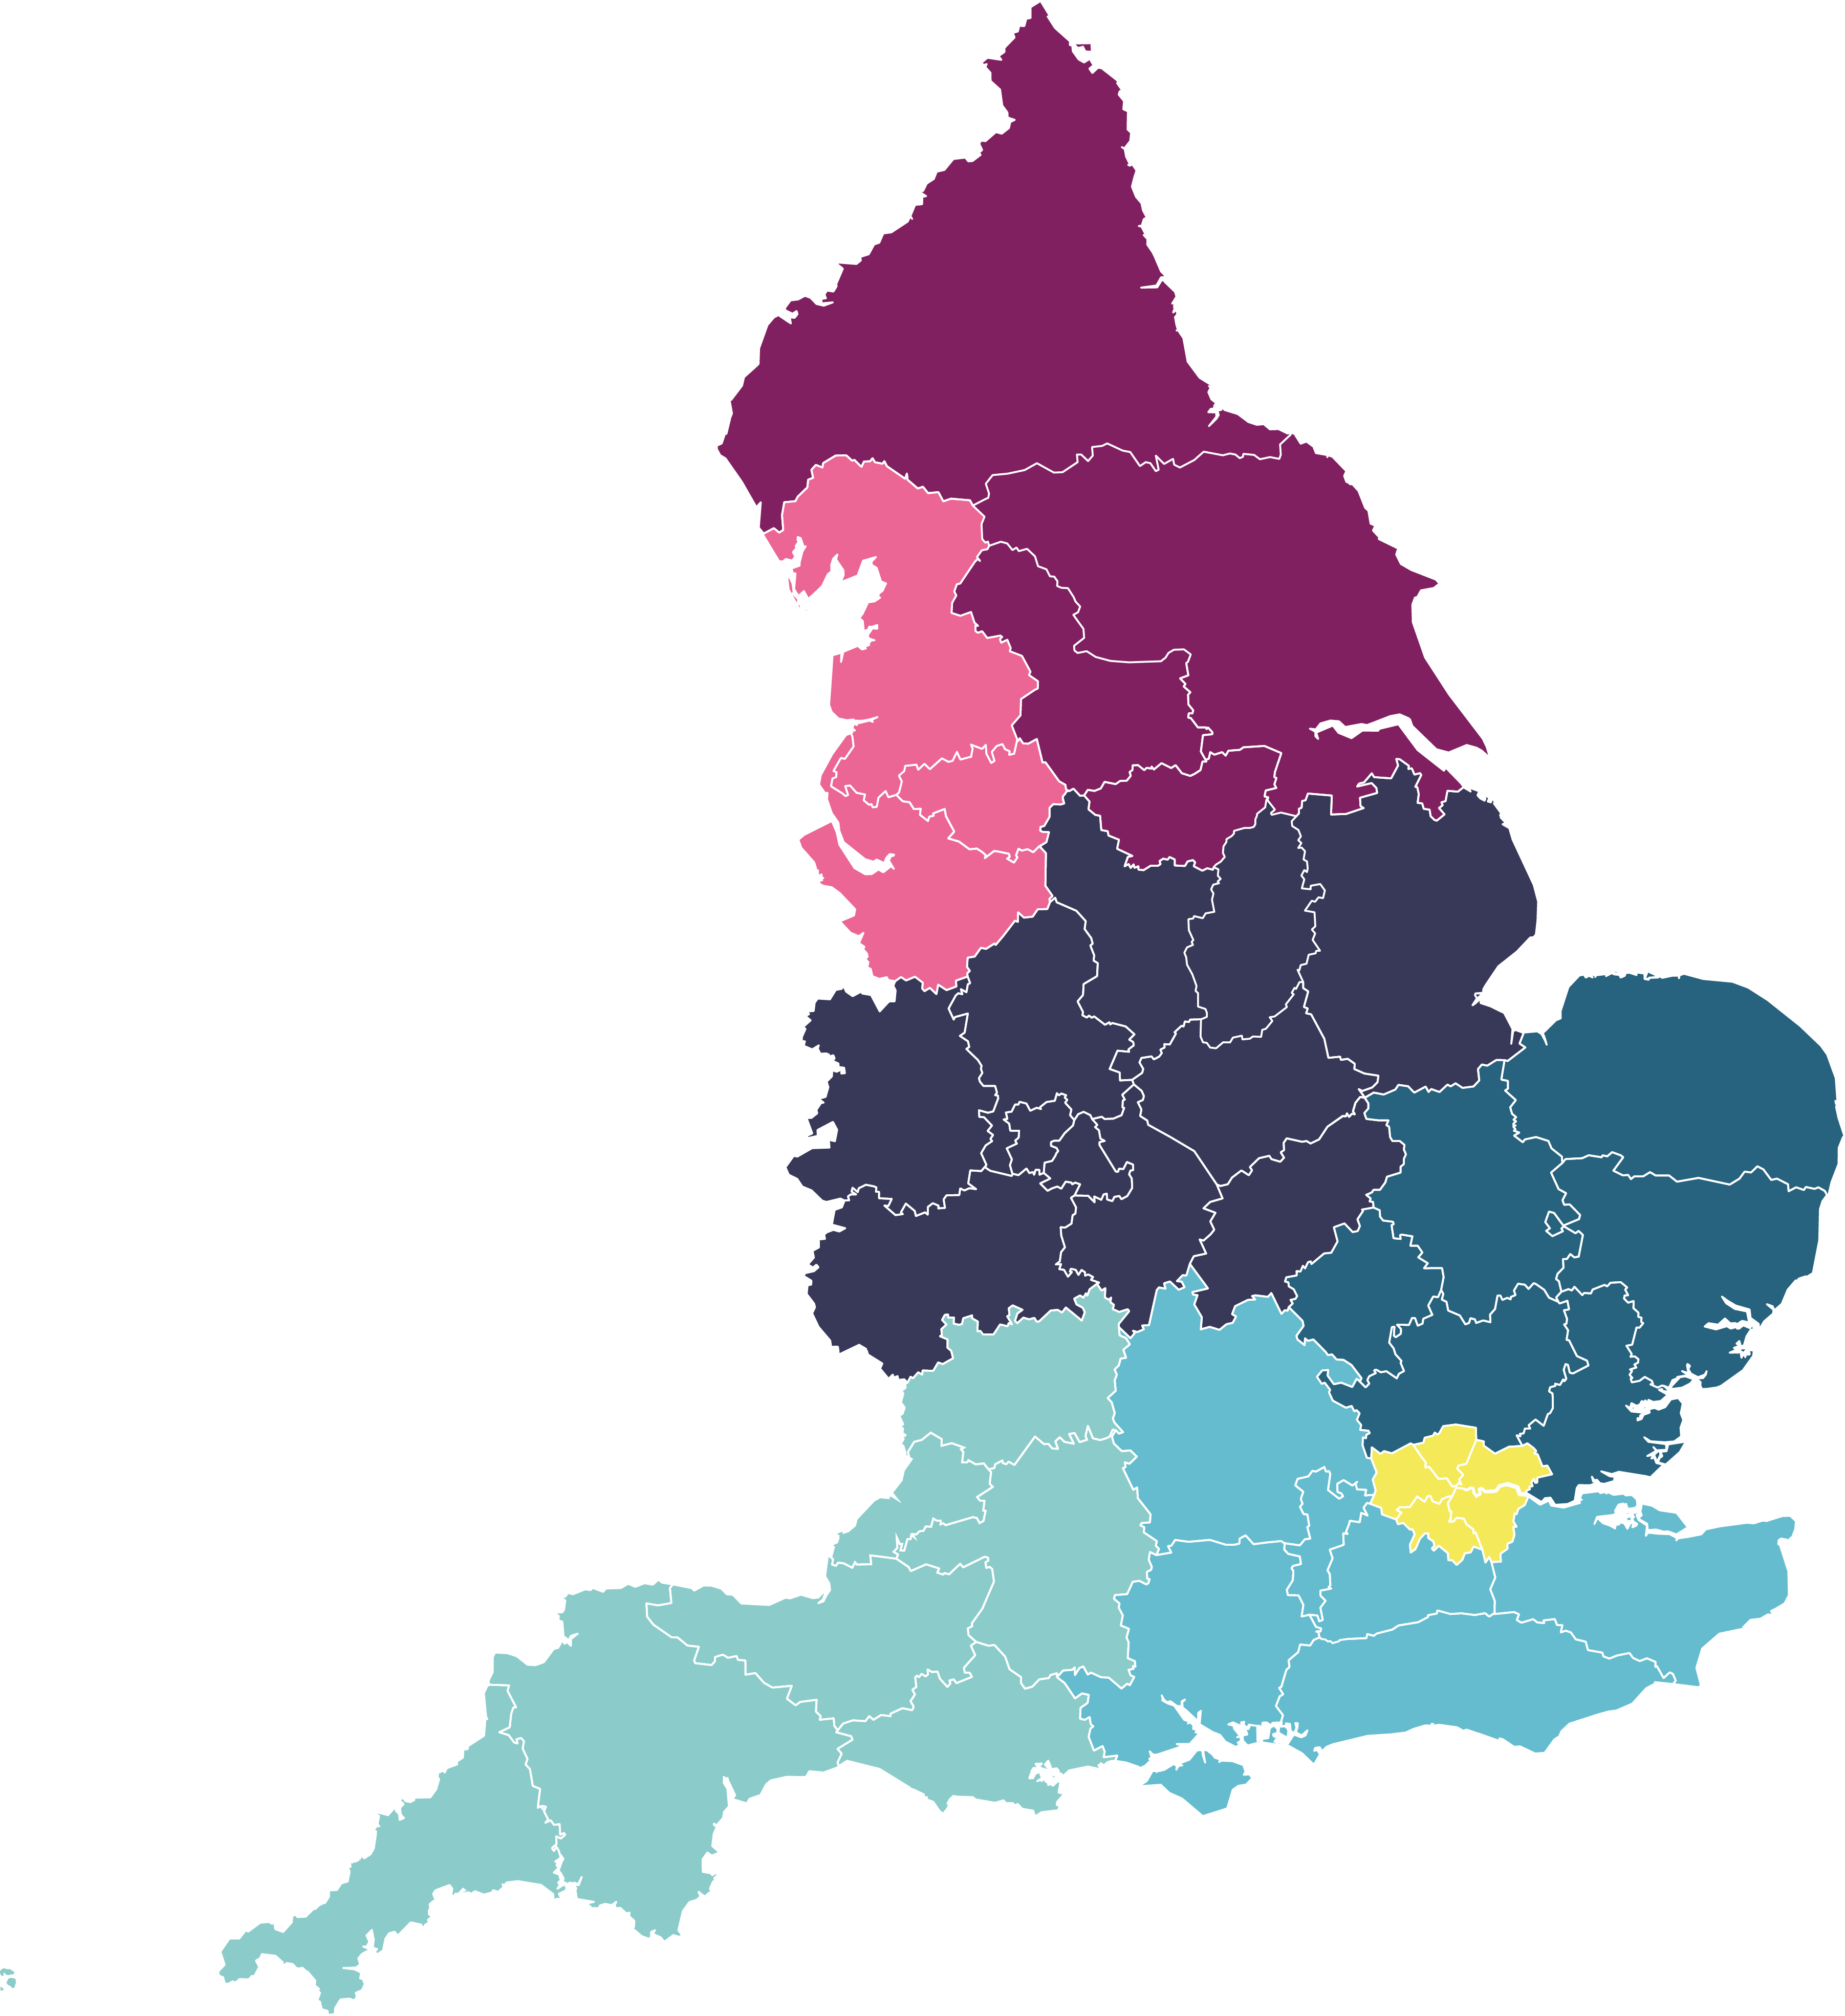 map of the england showing icbs